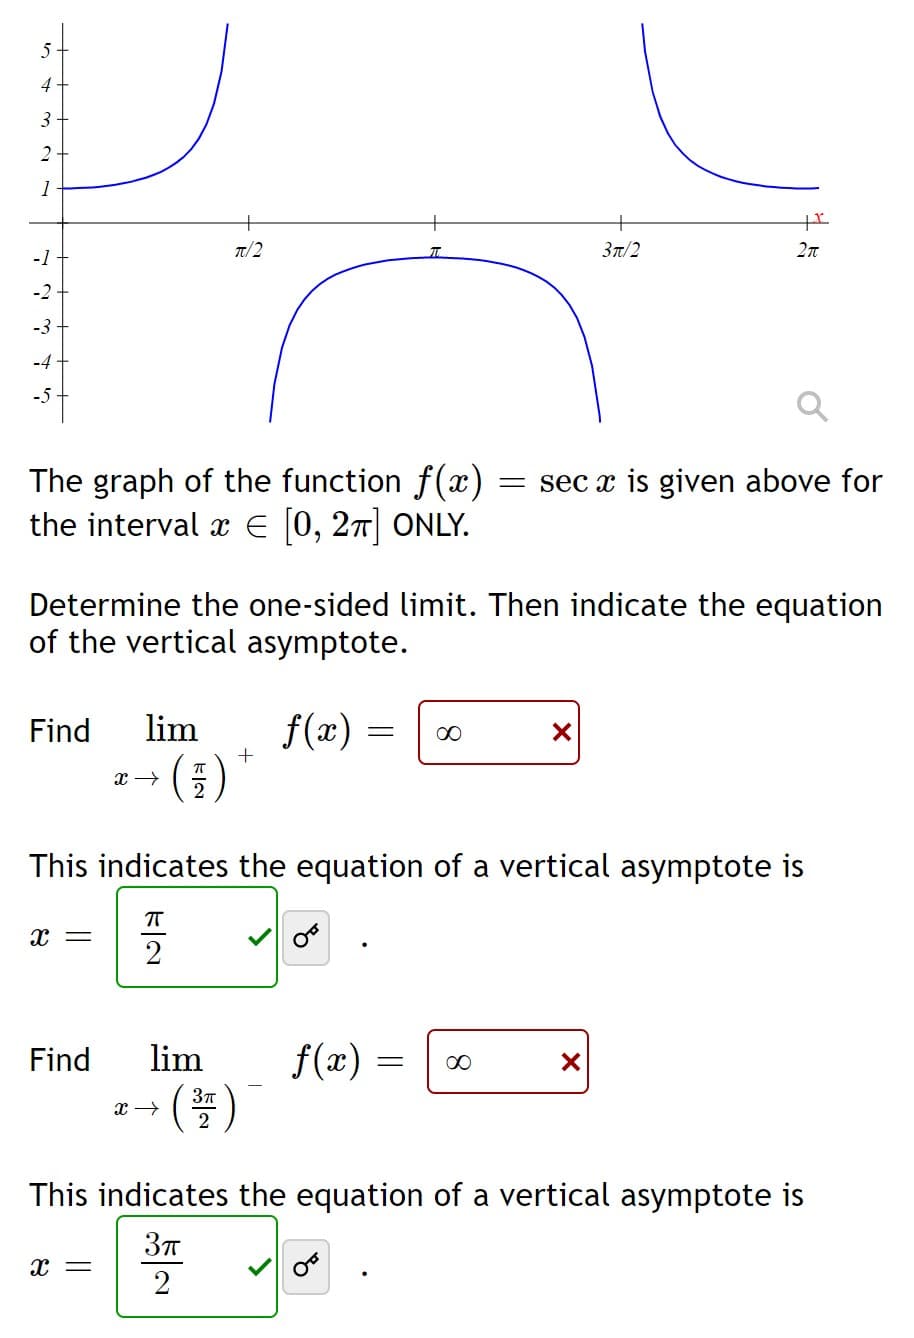 5
4
3
2
1
7/2
37/2
-1
-2
-3
-4
-5
The graph of the function f(x)
the interval x E (0, 27] ONLY.
= sec x is given above for
Determine the one-sided limit. Then indicate the equation
of the vertical asymptote.
Find
lim
f(x) =
00
This indicates the equation of a vertical asymptote is
x =
f(æ) =
()
Find
lim
00
This indicates the equation of a vertical asymptote is
37
2
